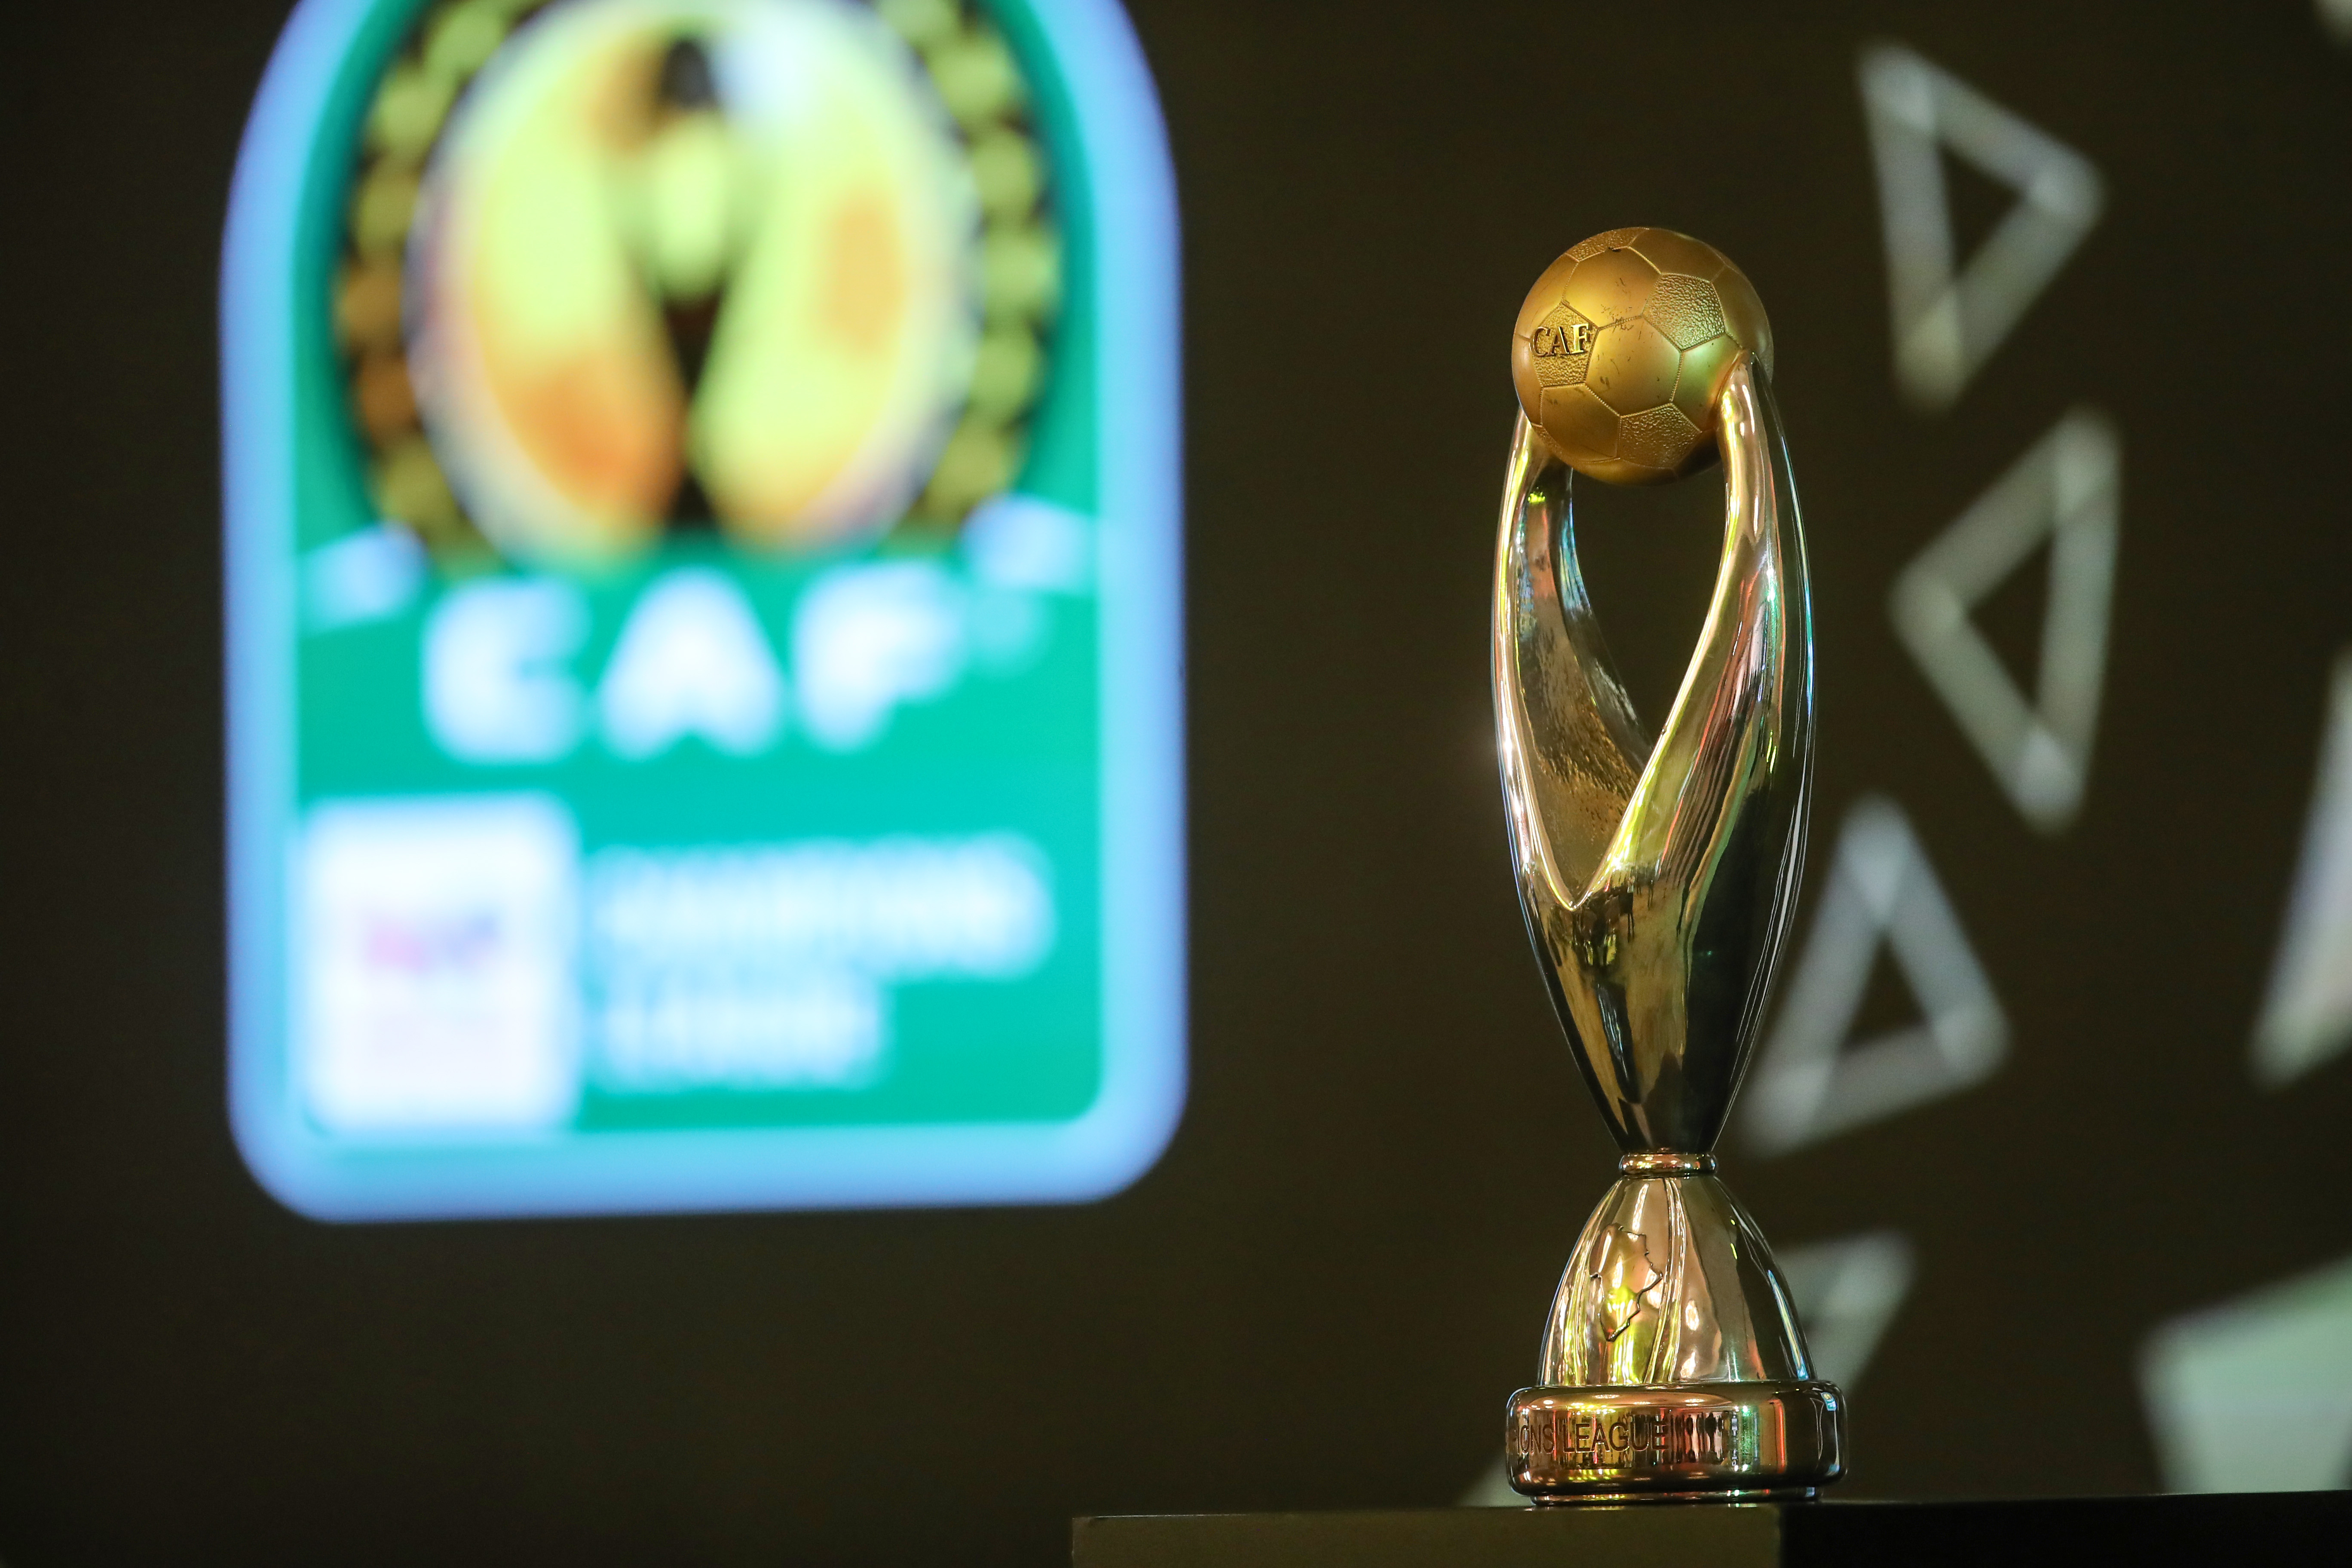 Espérance and Al Ahly prepare for ACT I of TotalEnergies CAF Champions League Final in Rades on Saturday night 